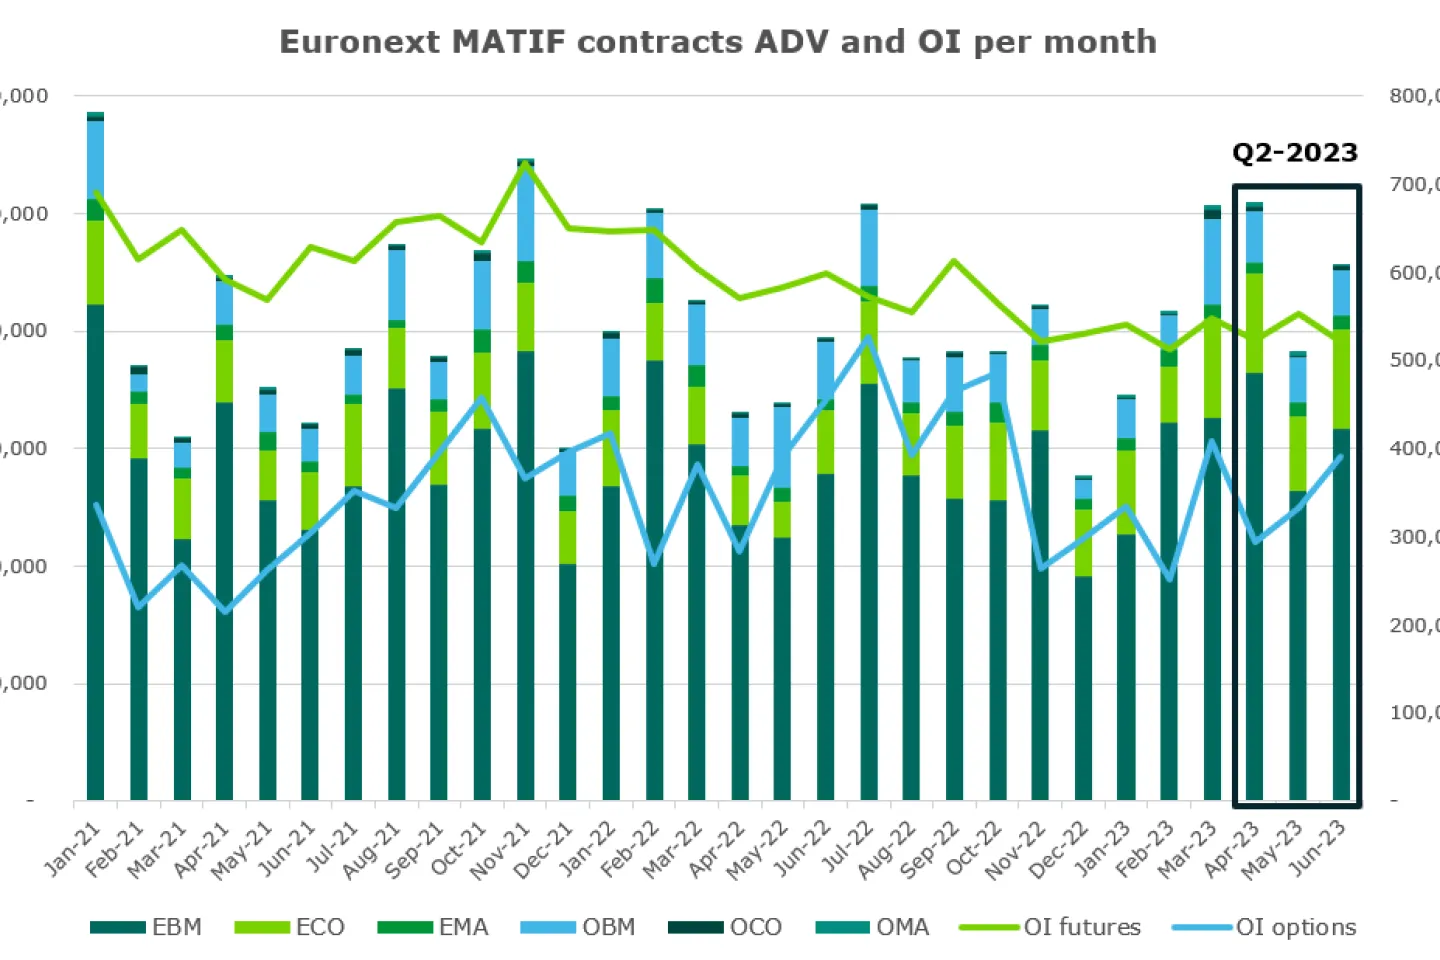 Euronext MATIF contracts ADV and OI per month